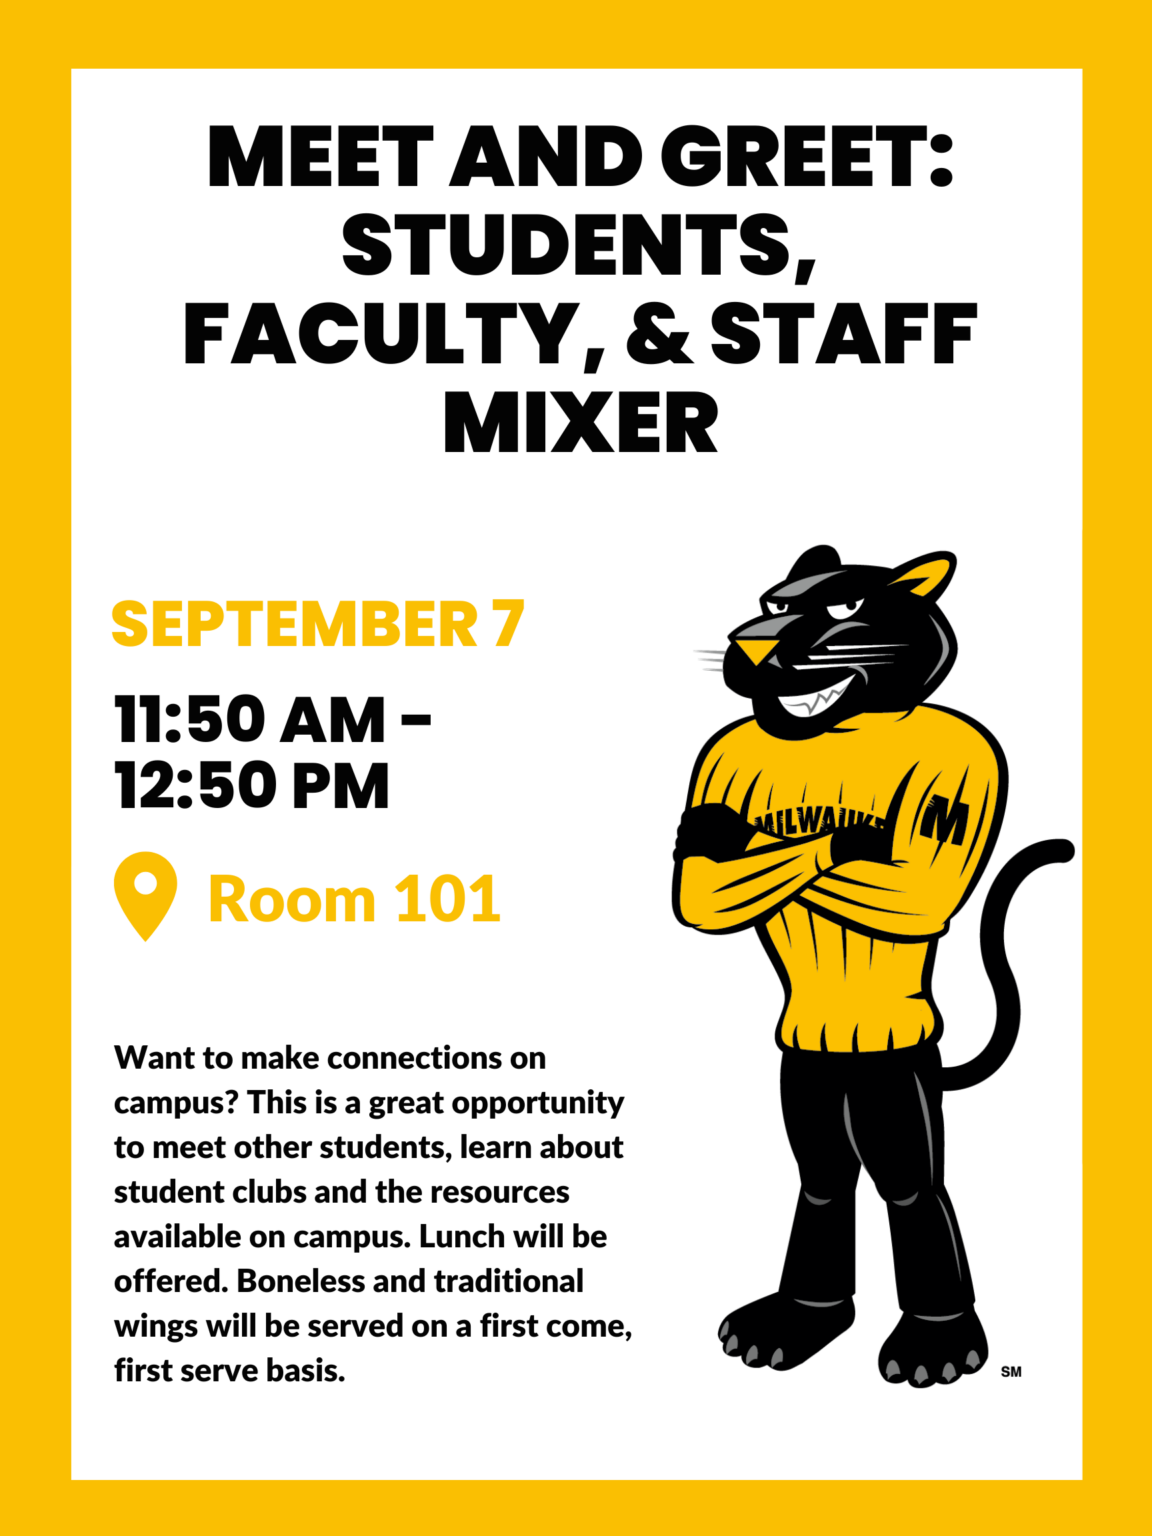 Meet And Greet Students Faculty And Staff Mixer UWM Washington County